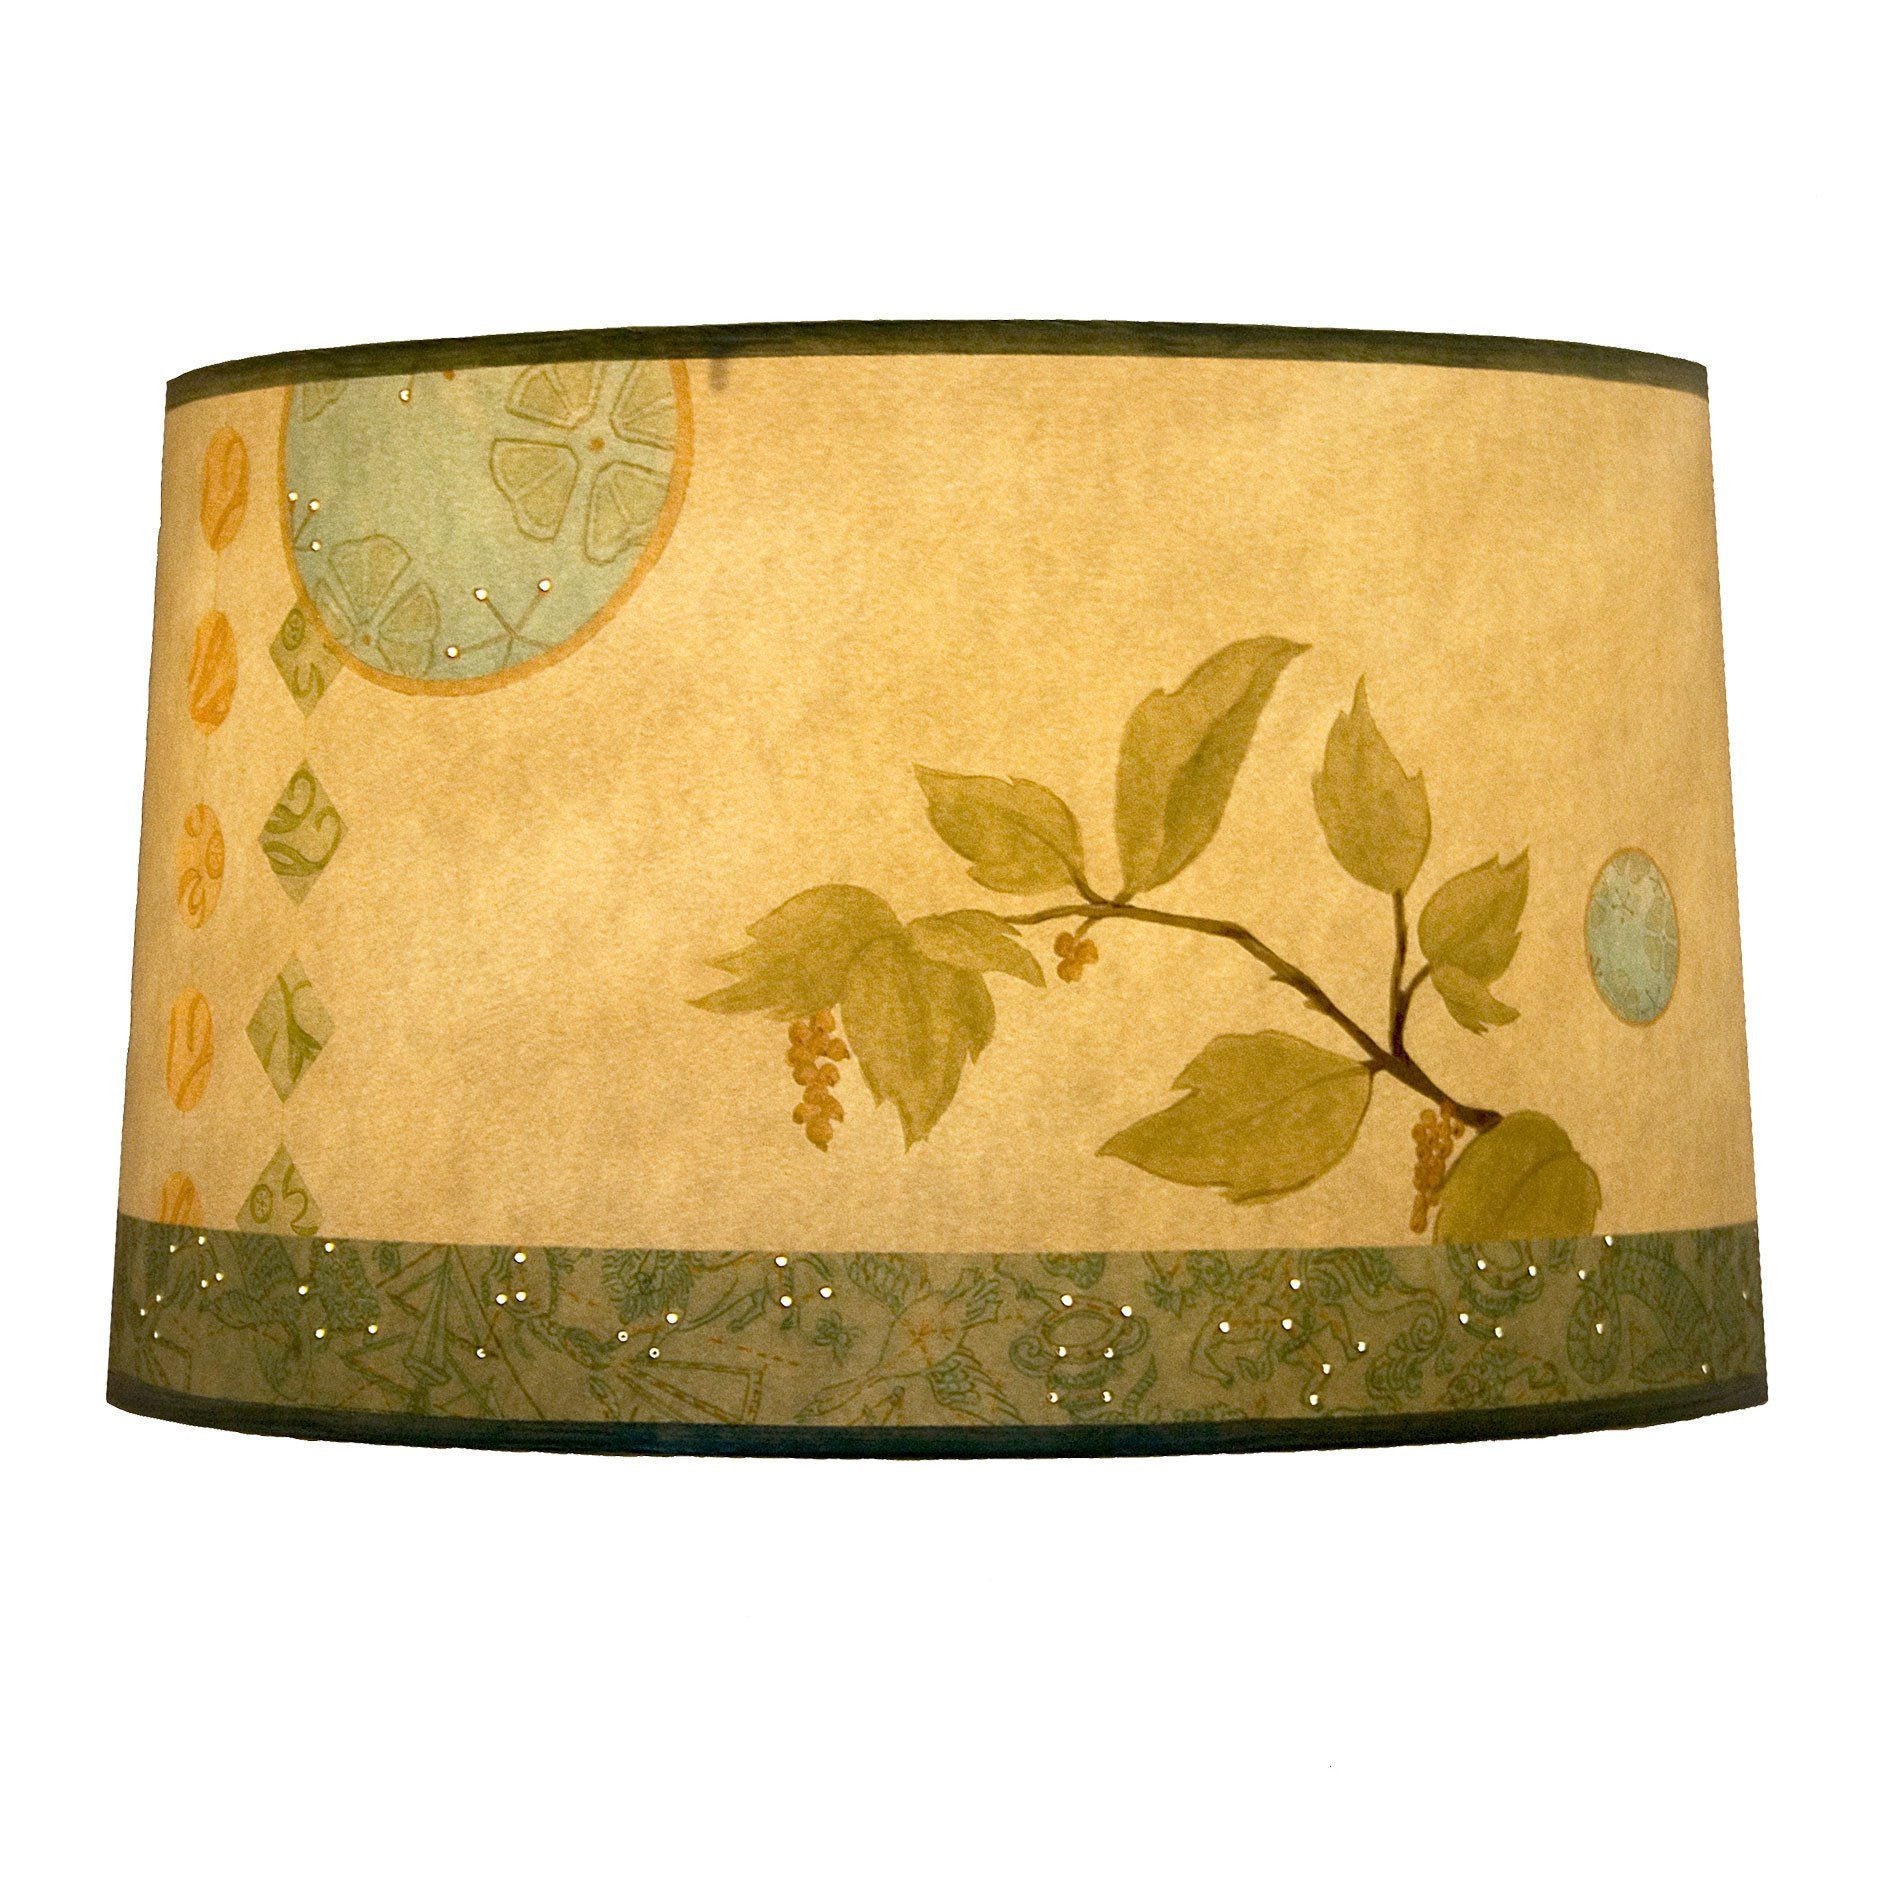 Janna Ugone & Co Lamp Shades Large Drum Lamp Shade in Celestial Leaf